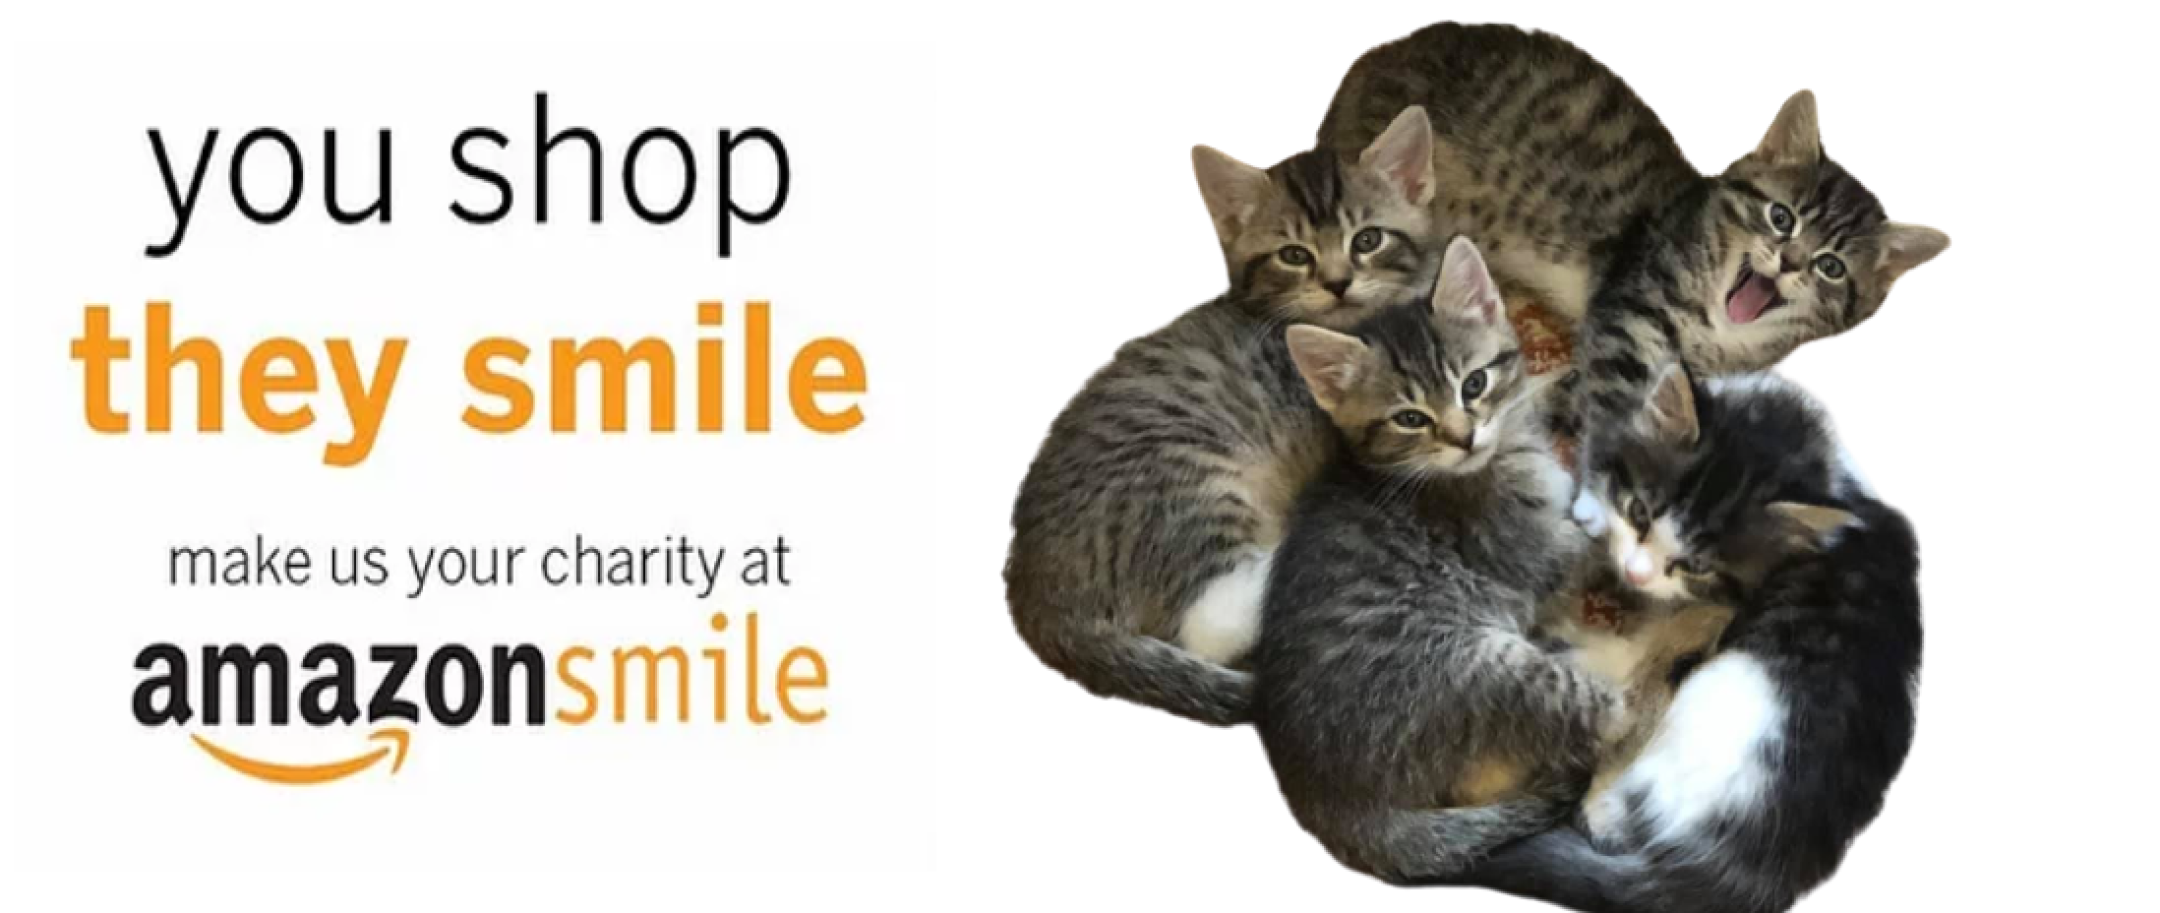 AmazonSmile - Choose Whiskers as your charity!